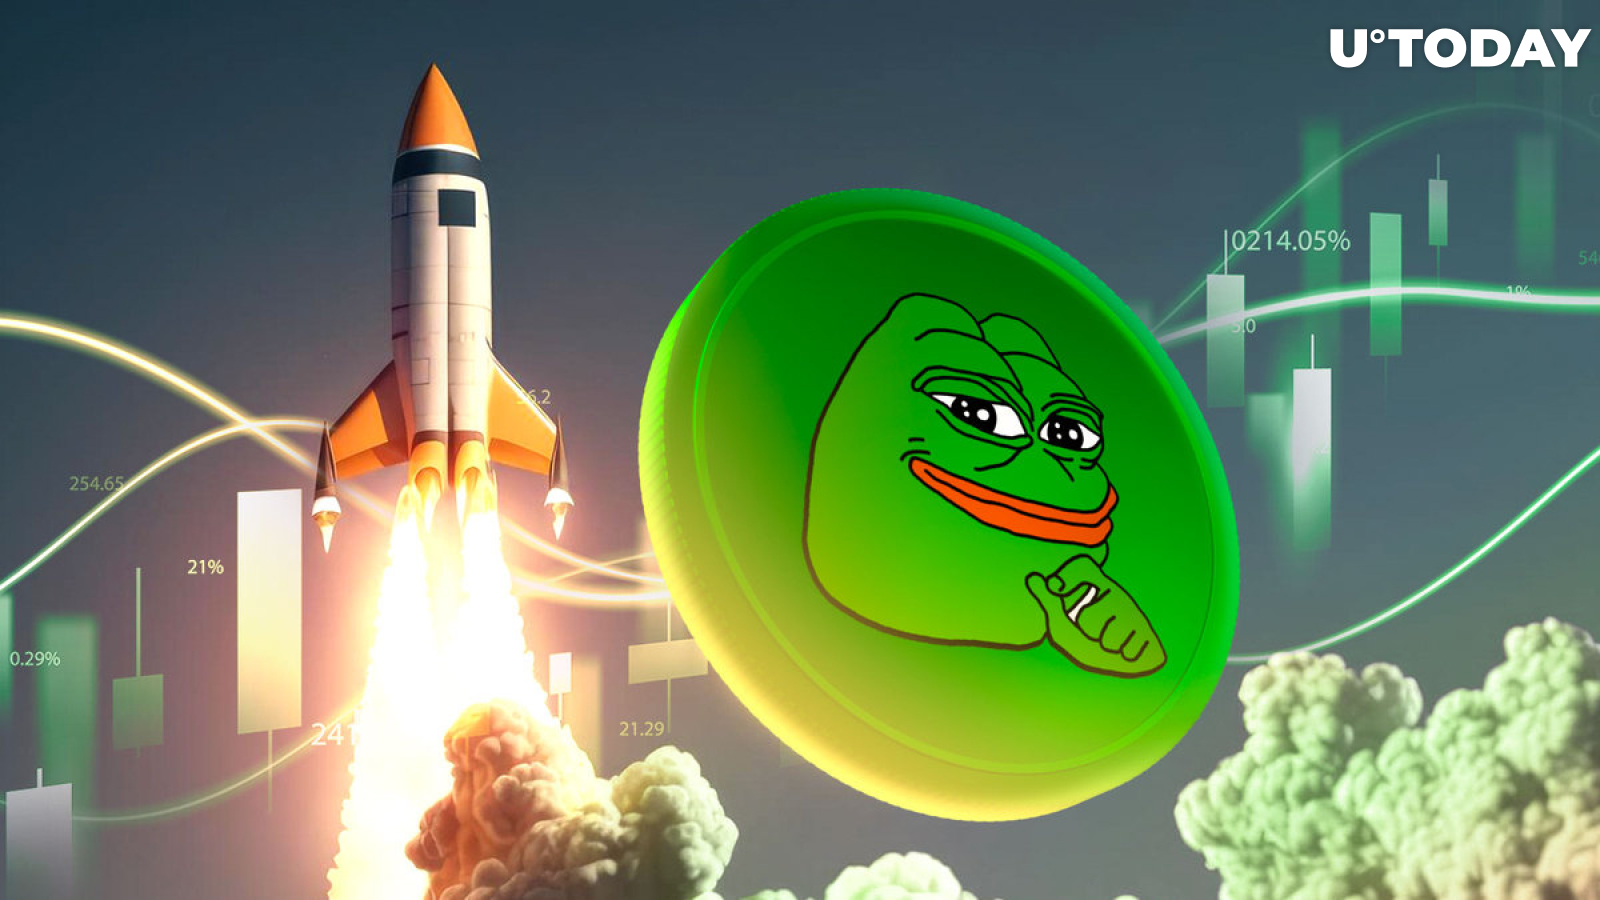 PEPE Jumps 38% on Solo Ride to Moon, Will This Rally Last?